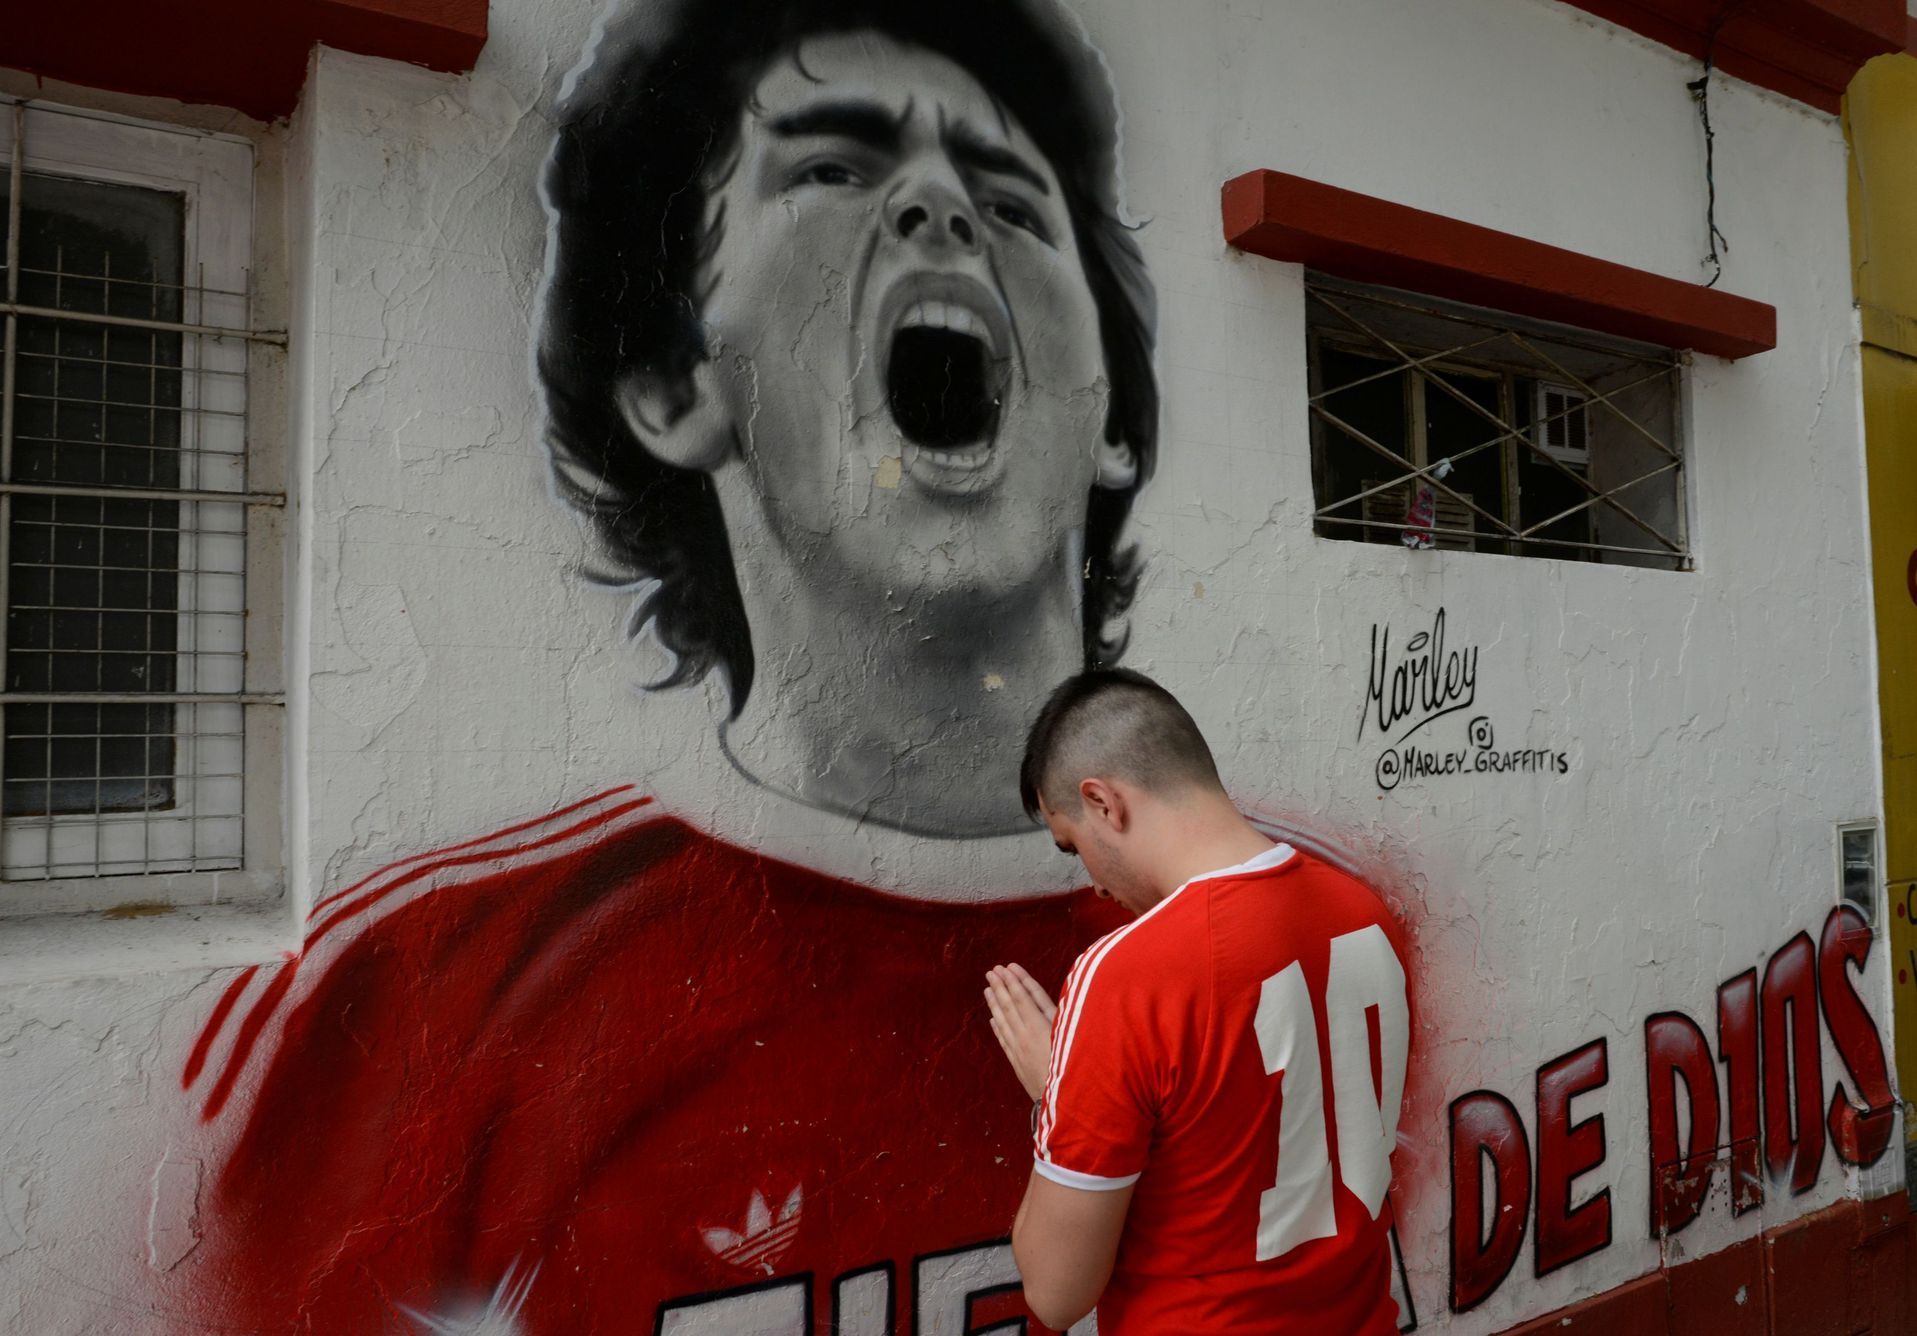 A fan reacts while mourning the death of soccer legend Diego Maradona, outside the Diego Armando Maradona stadium, in Buenos Aires